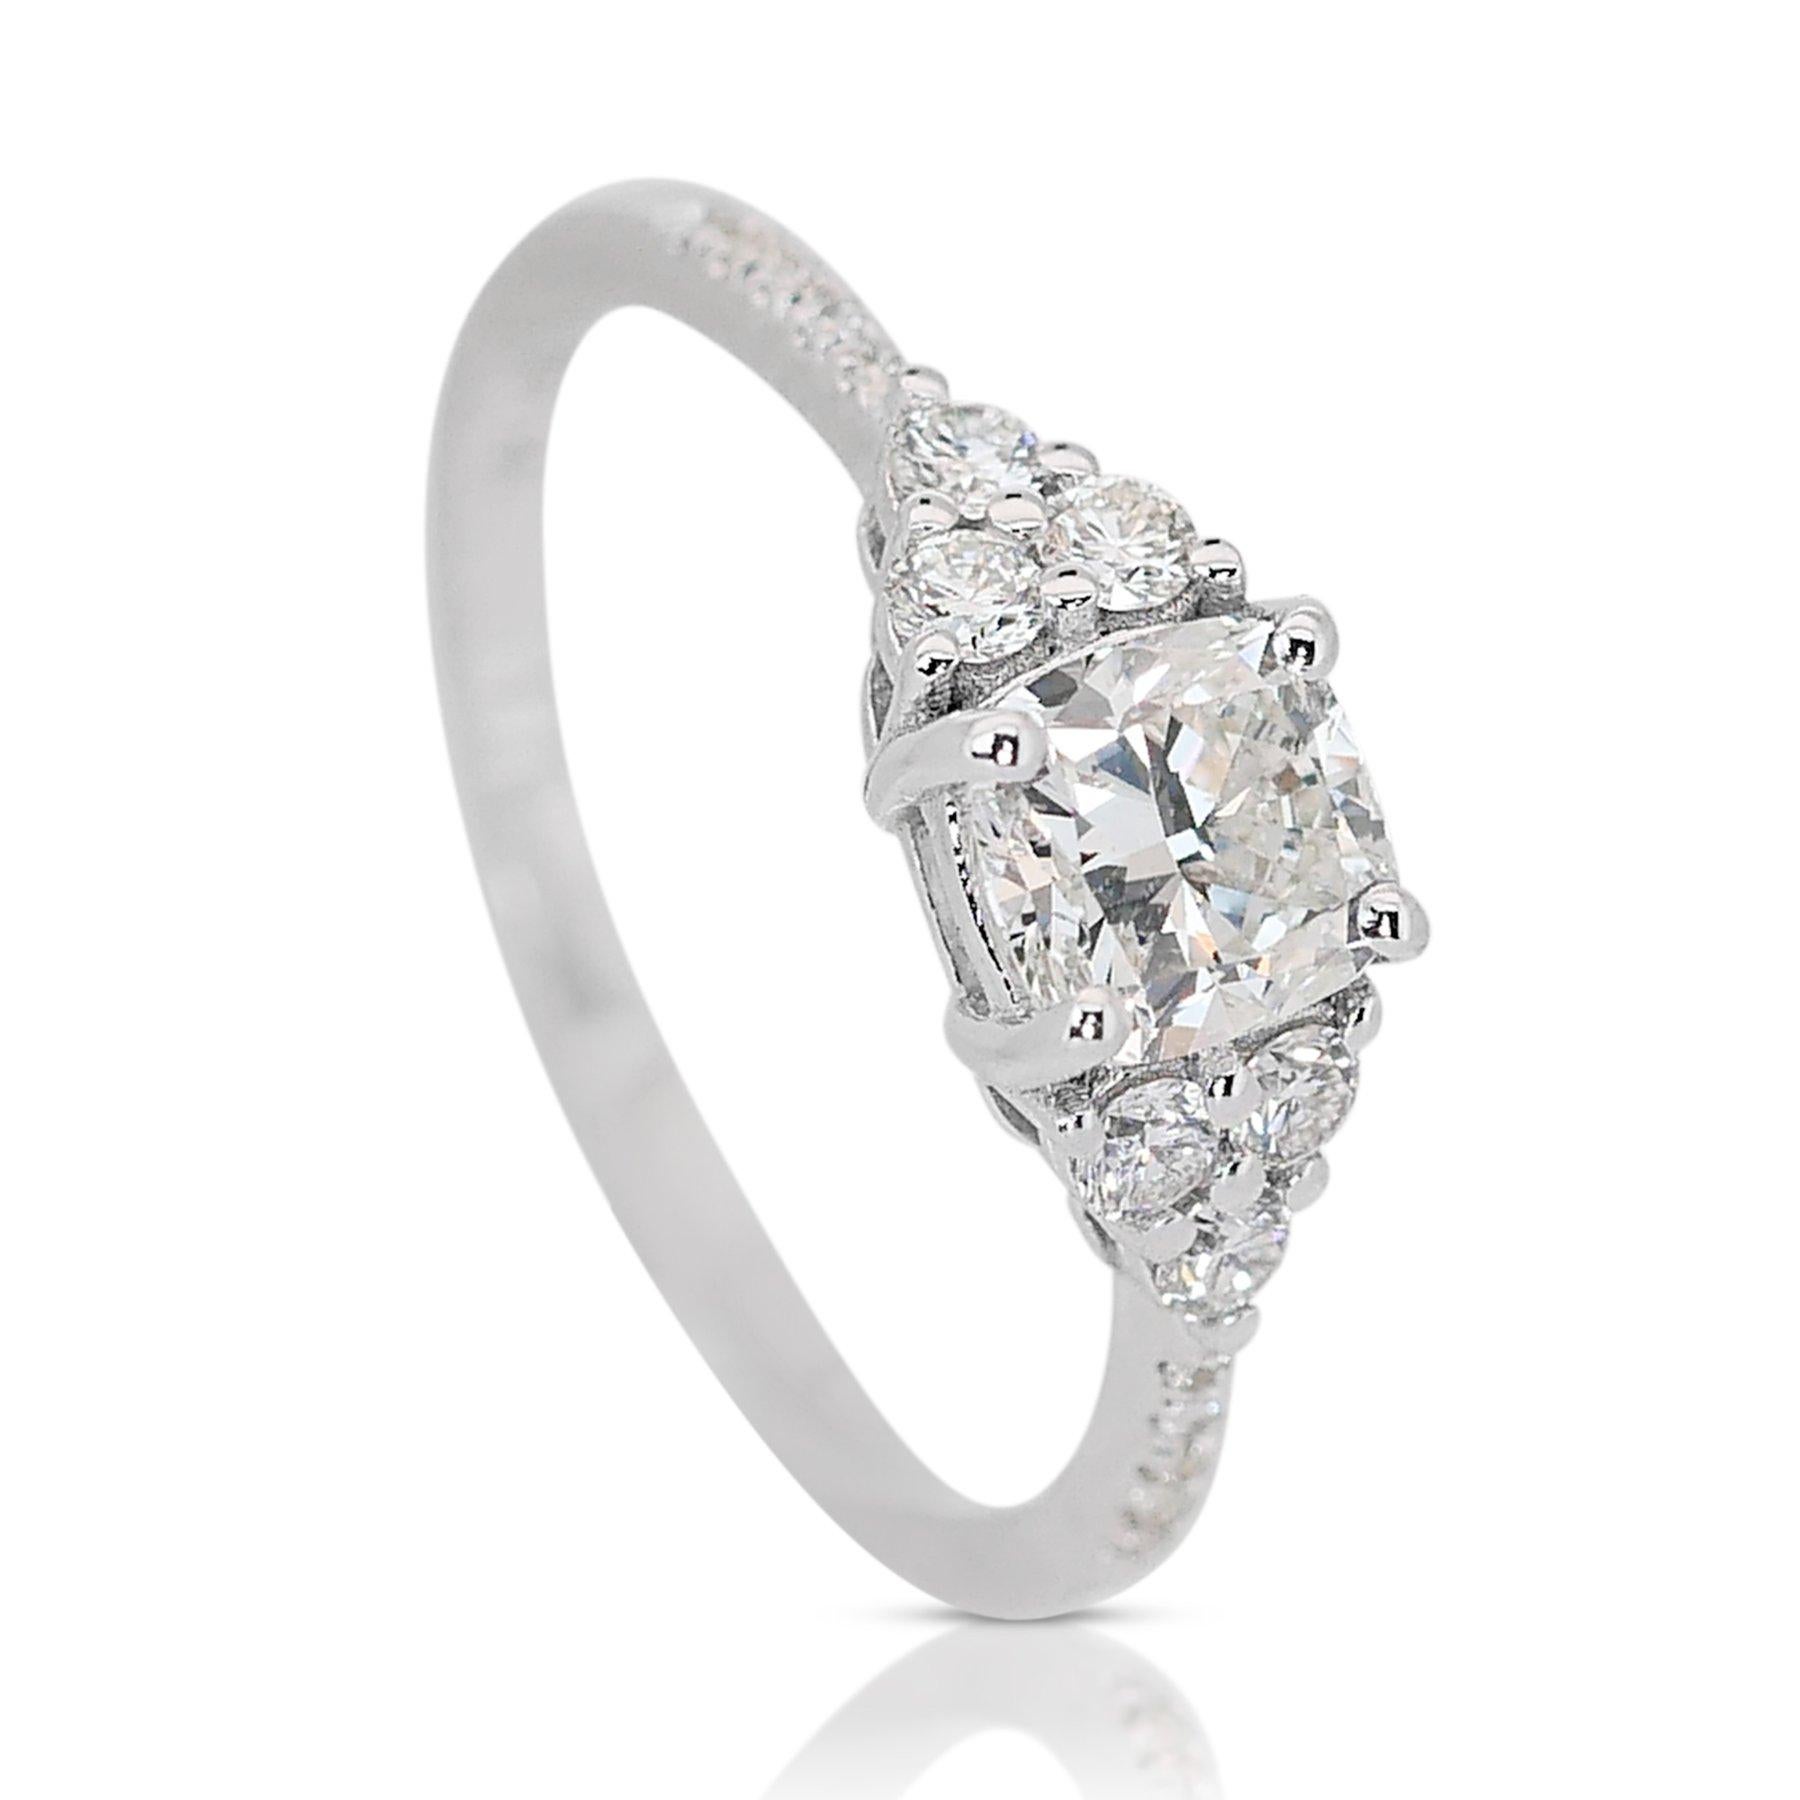 Cushion Cut Magnificent 1.30ct Diamonds Pave Ring in 14k White Gold - GIA Certified For Sale